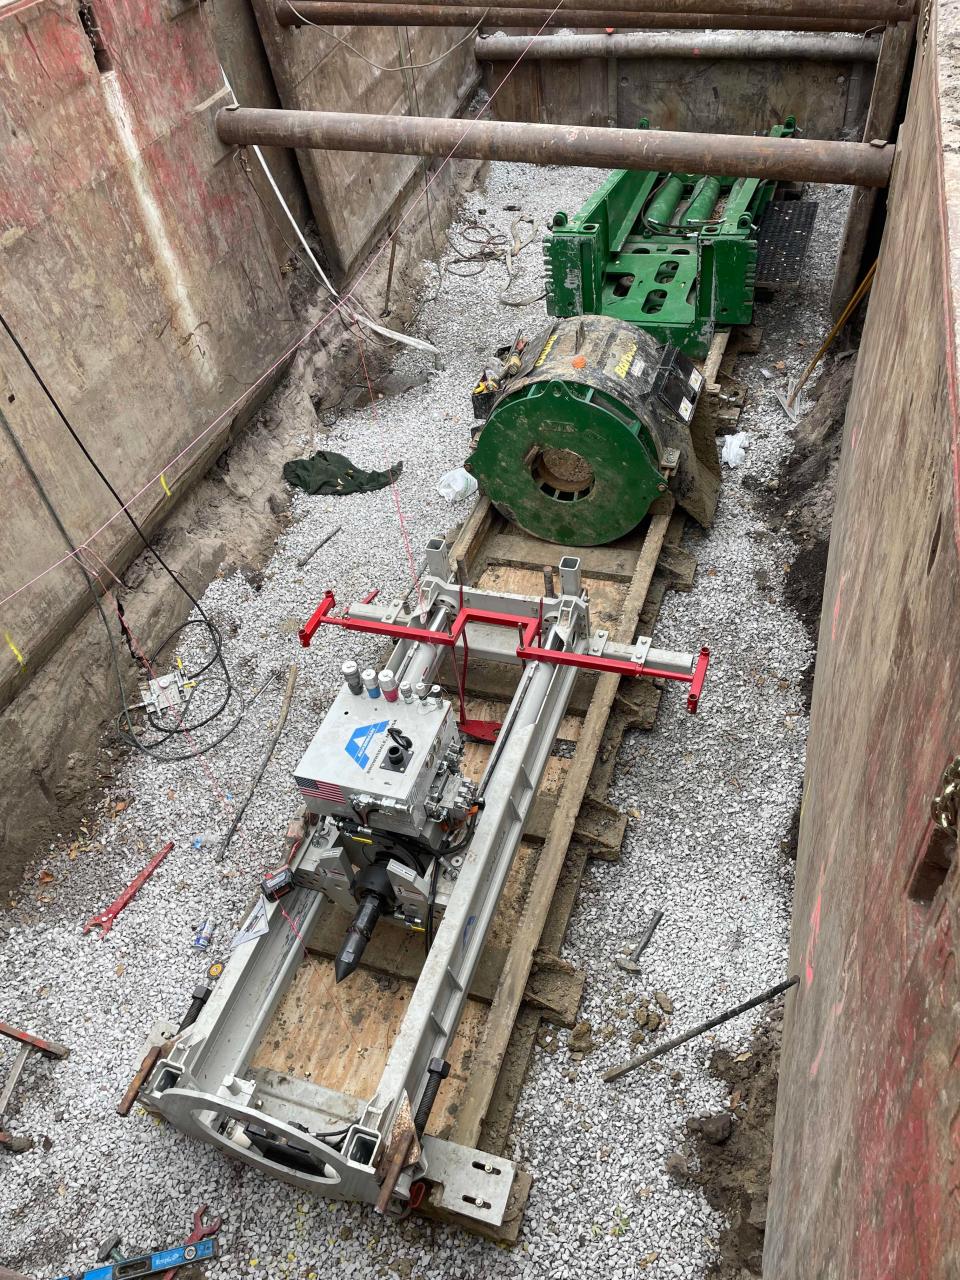 A casing machine for Raw Water Main installation under 13th street. The three new water wells Ames is installing will be connected to the Ames Water Treatment Plant on 13the Street through underground pipes.